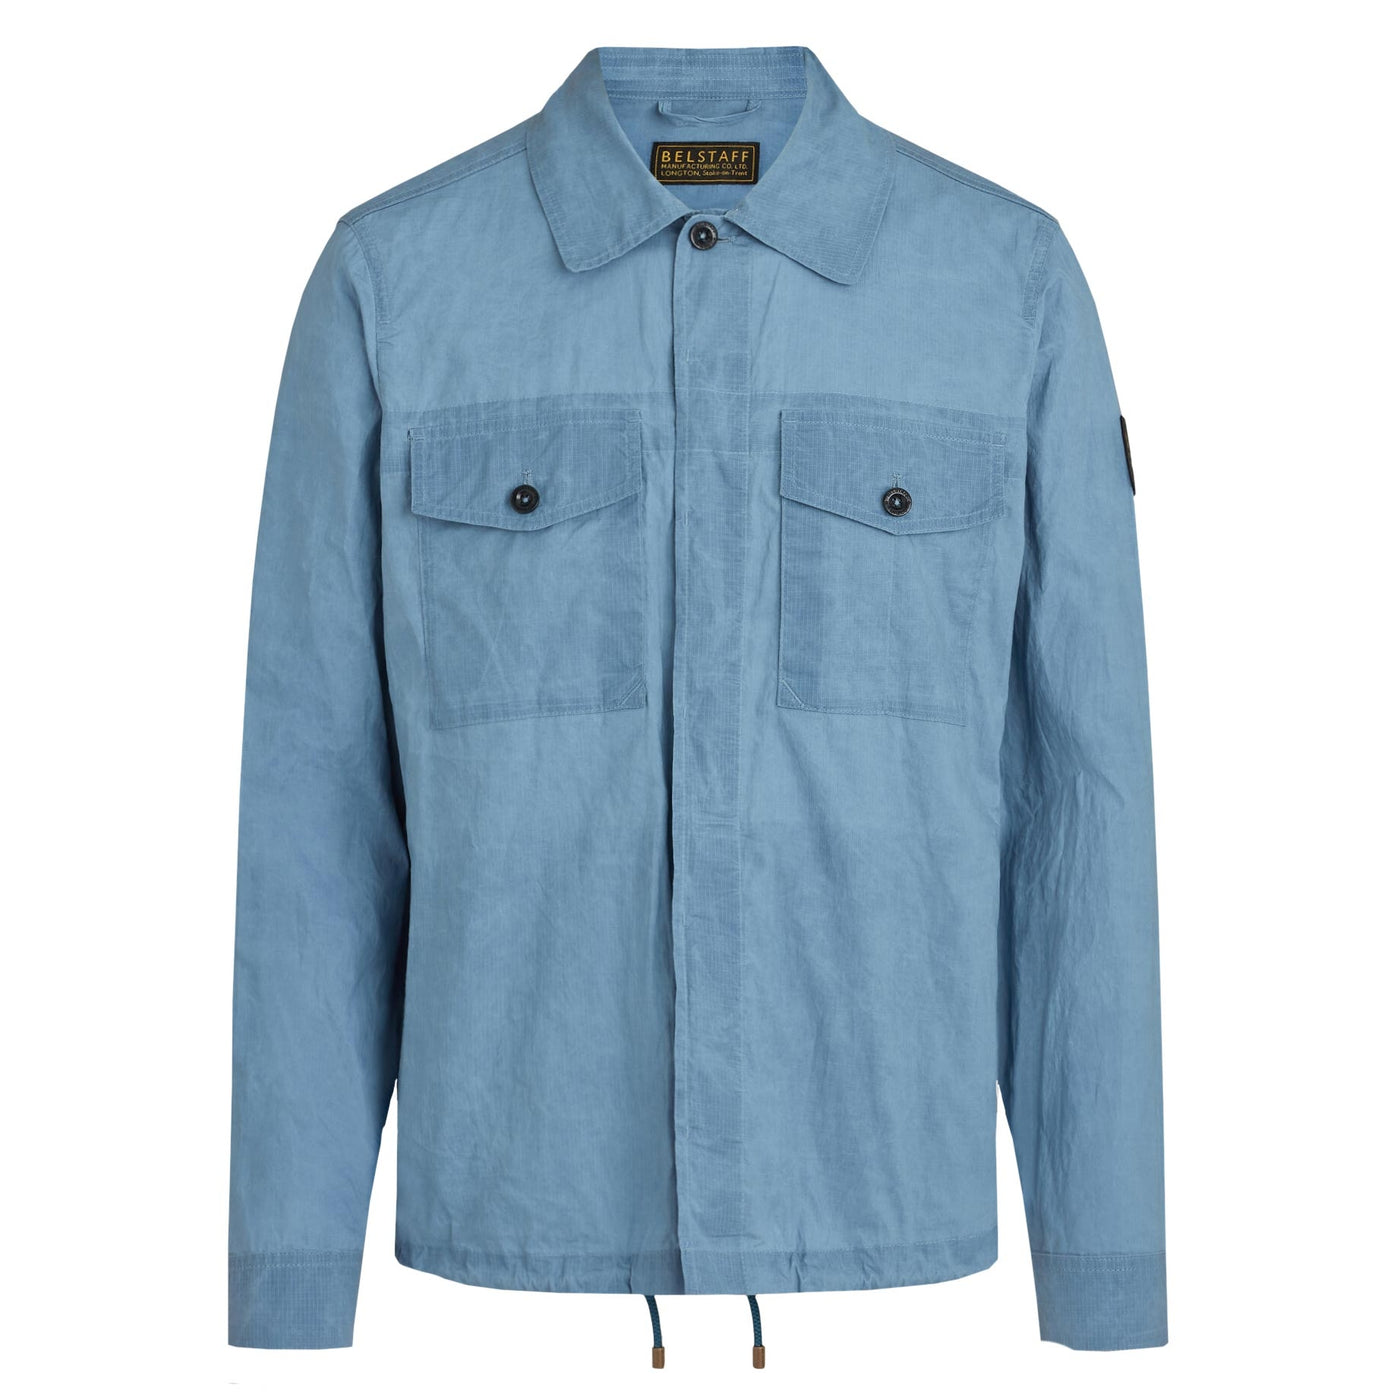 Belstaff Recon Overshirt in Airforce Blue